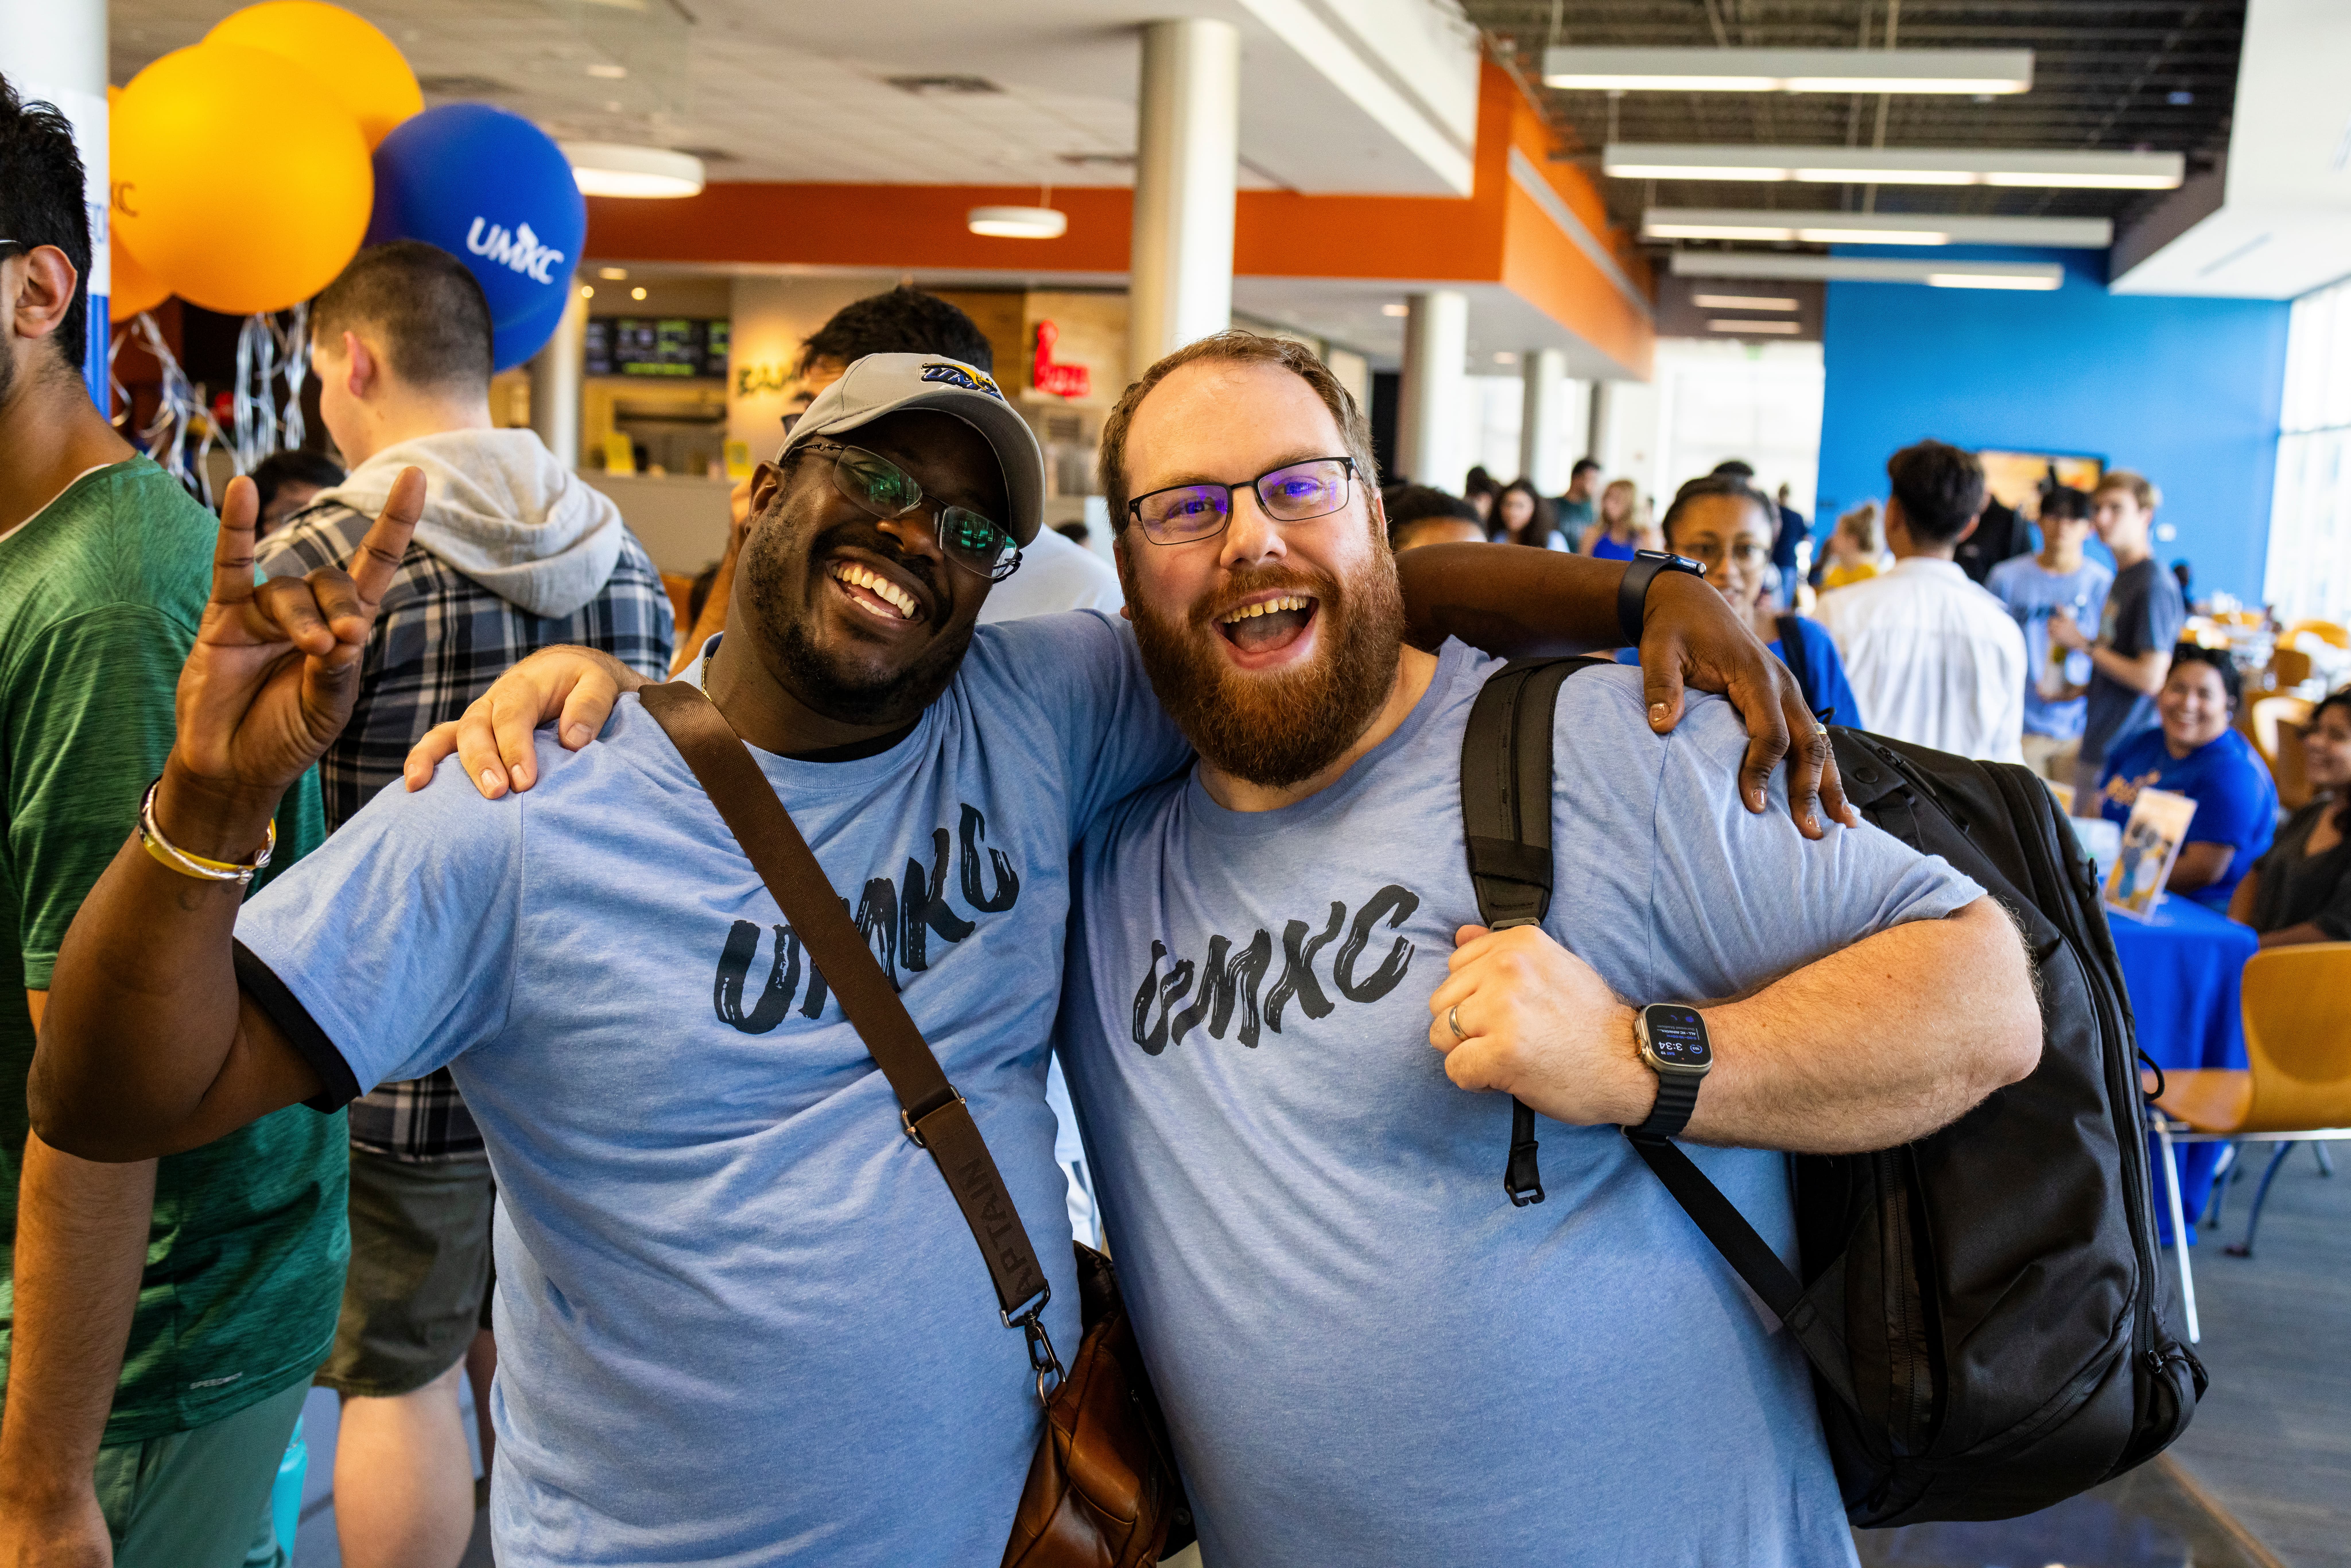 Two staff members looking happy have their arms around each other while wearing blue UMKC t-shirts during a soccer game